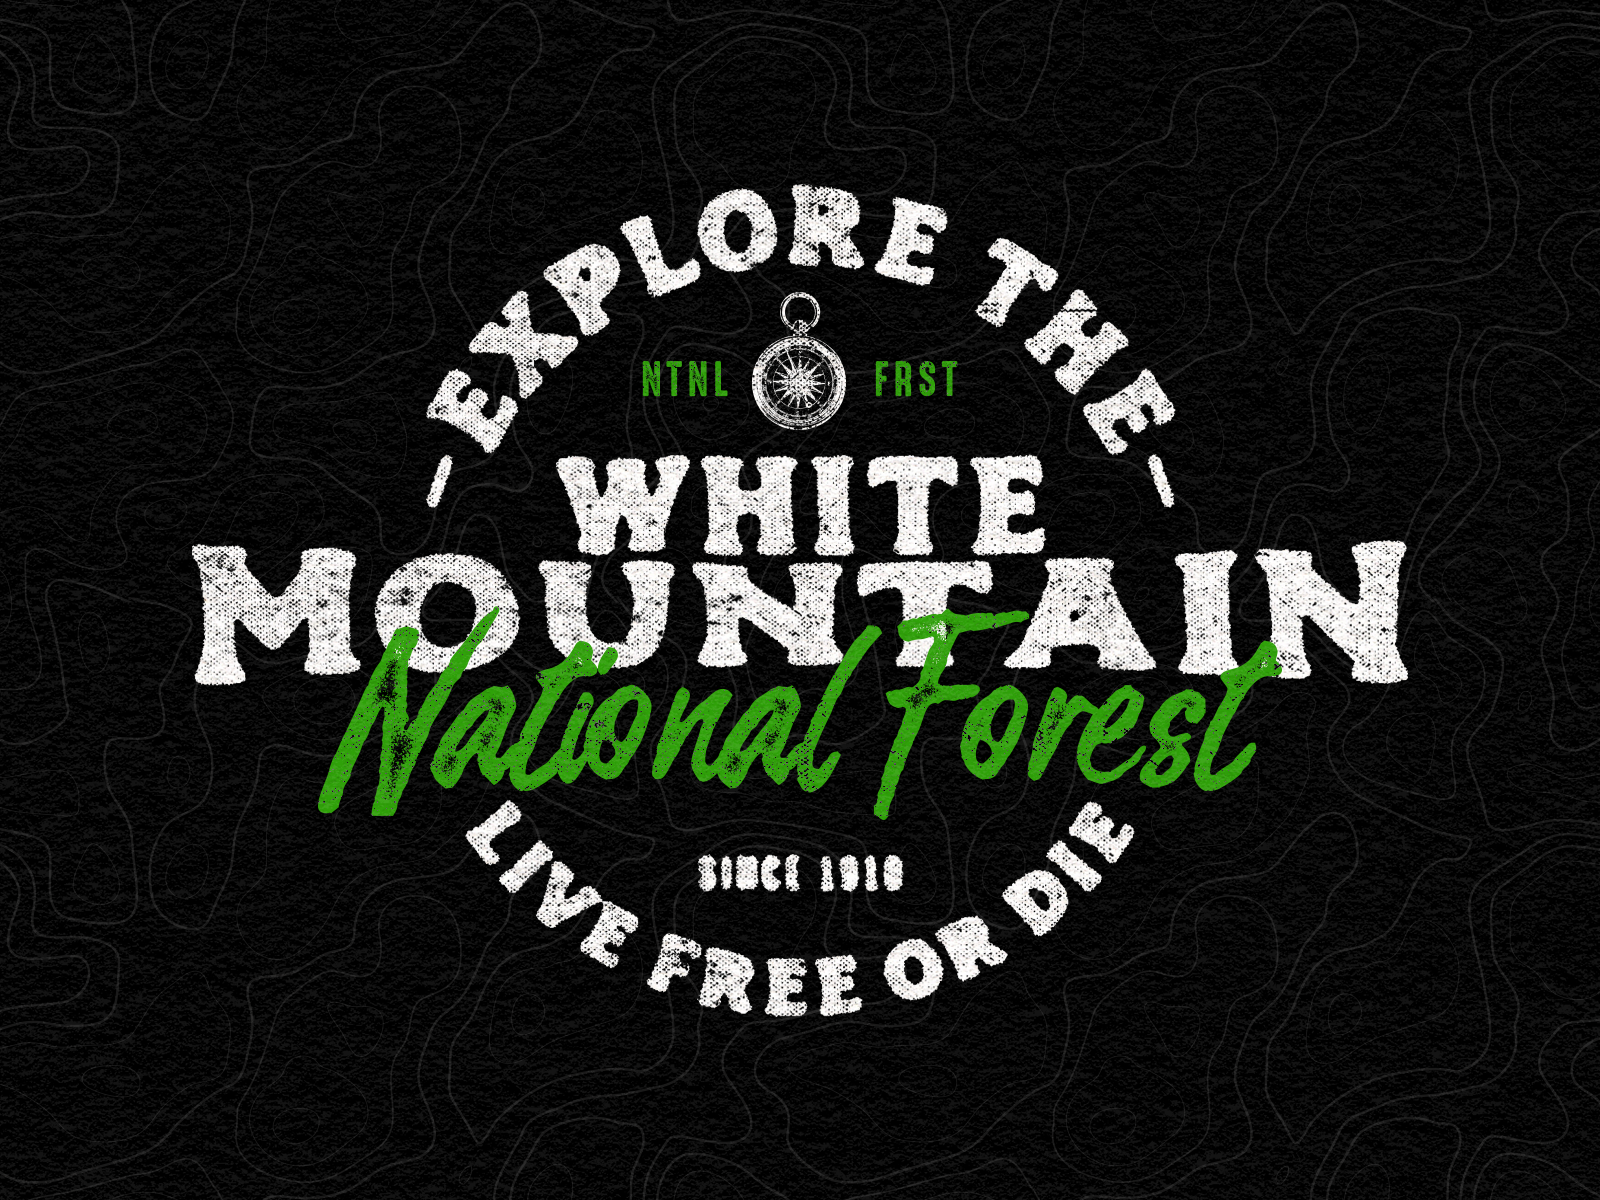 Explore the White Mountains merchandise tshirt rustic vintage national forest tourism new england new hampshire type lockup badge illustration texture typography graphic design design